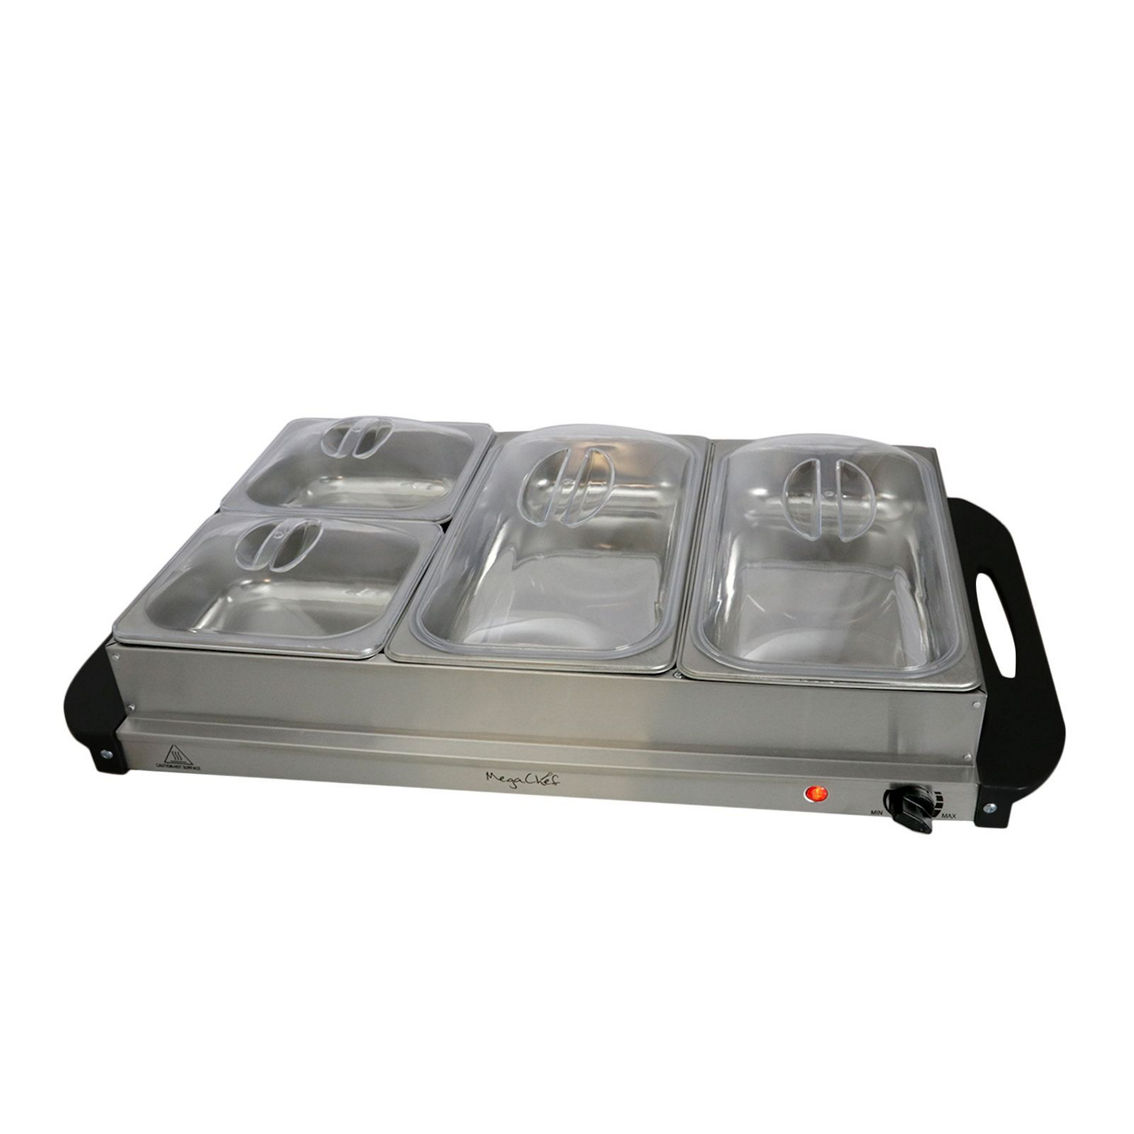 MegaChef Buffet Server & Food Warmer With 4 Removable Sectional Trays , Heated W - Image 5 of 5